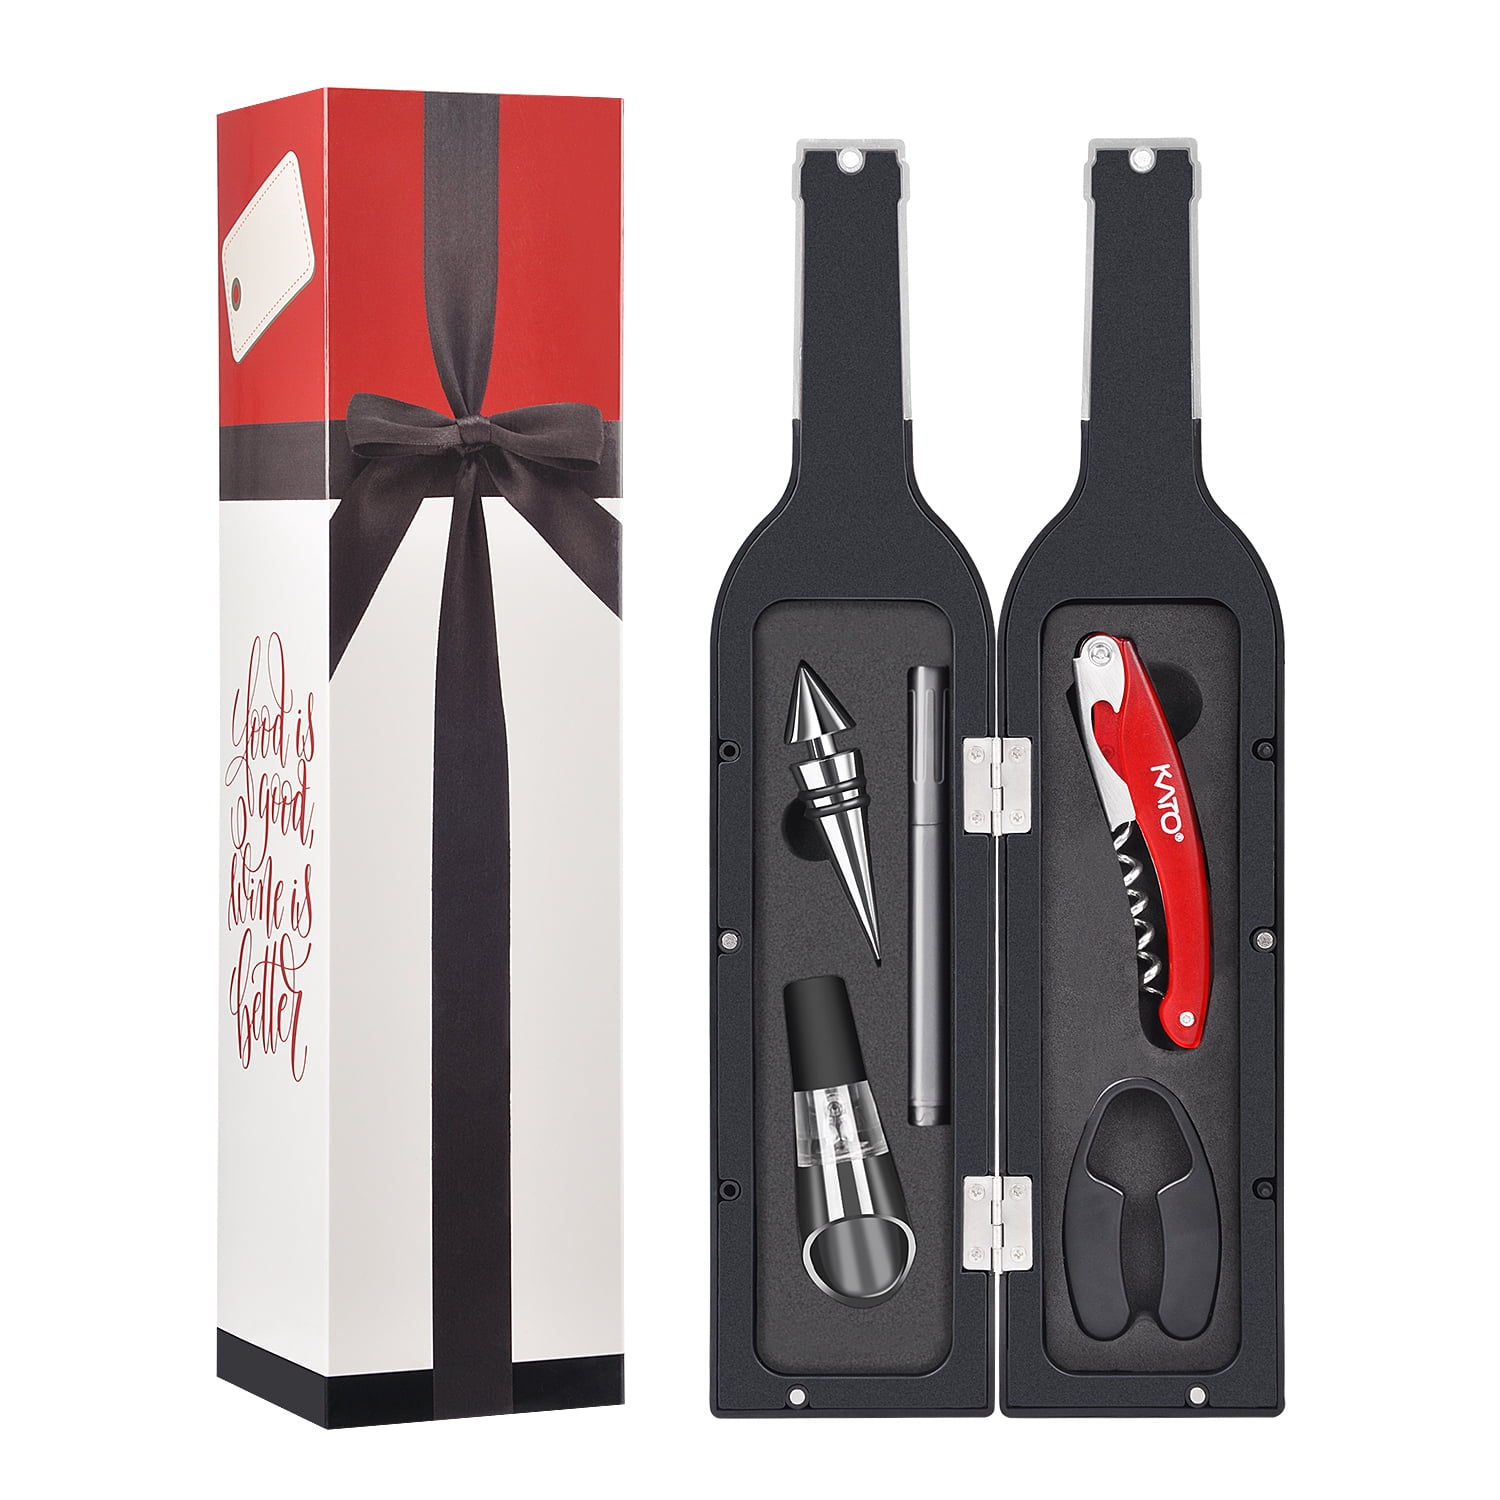 Custom Wine Glass Set - 6pc Boxed Wine Gift Set with Electric Opener Wine Lover Gift - Home Wet Bar